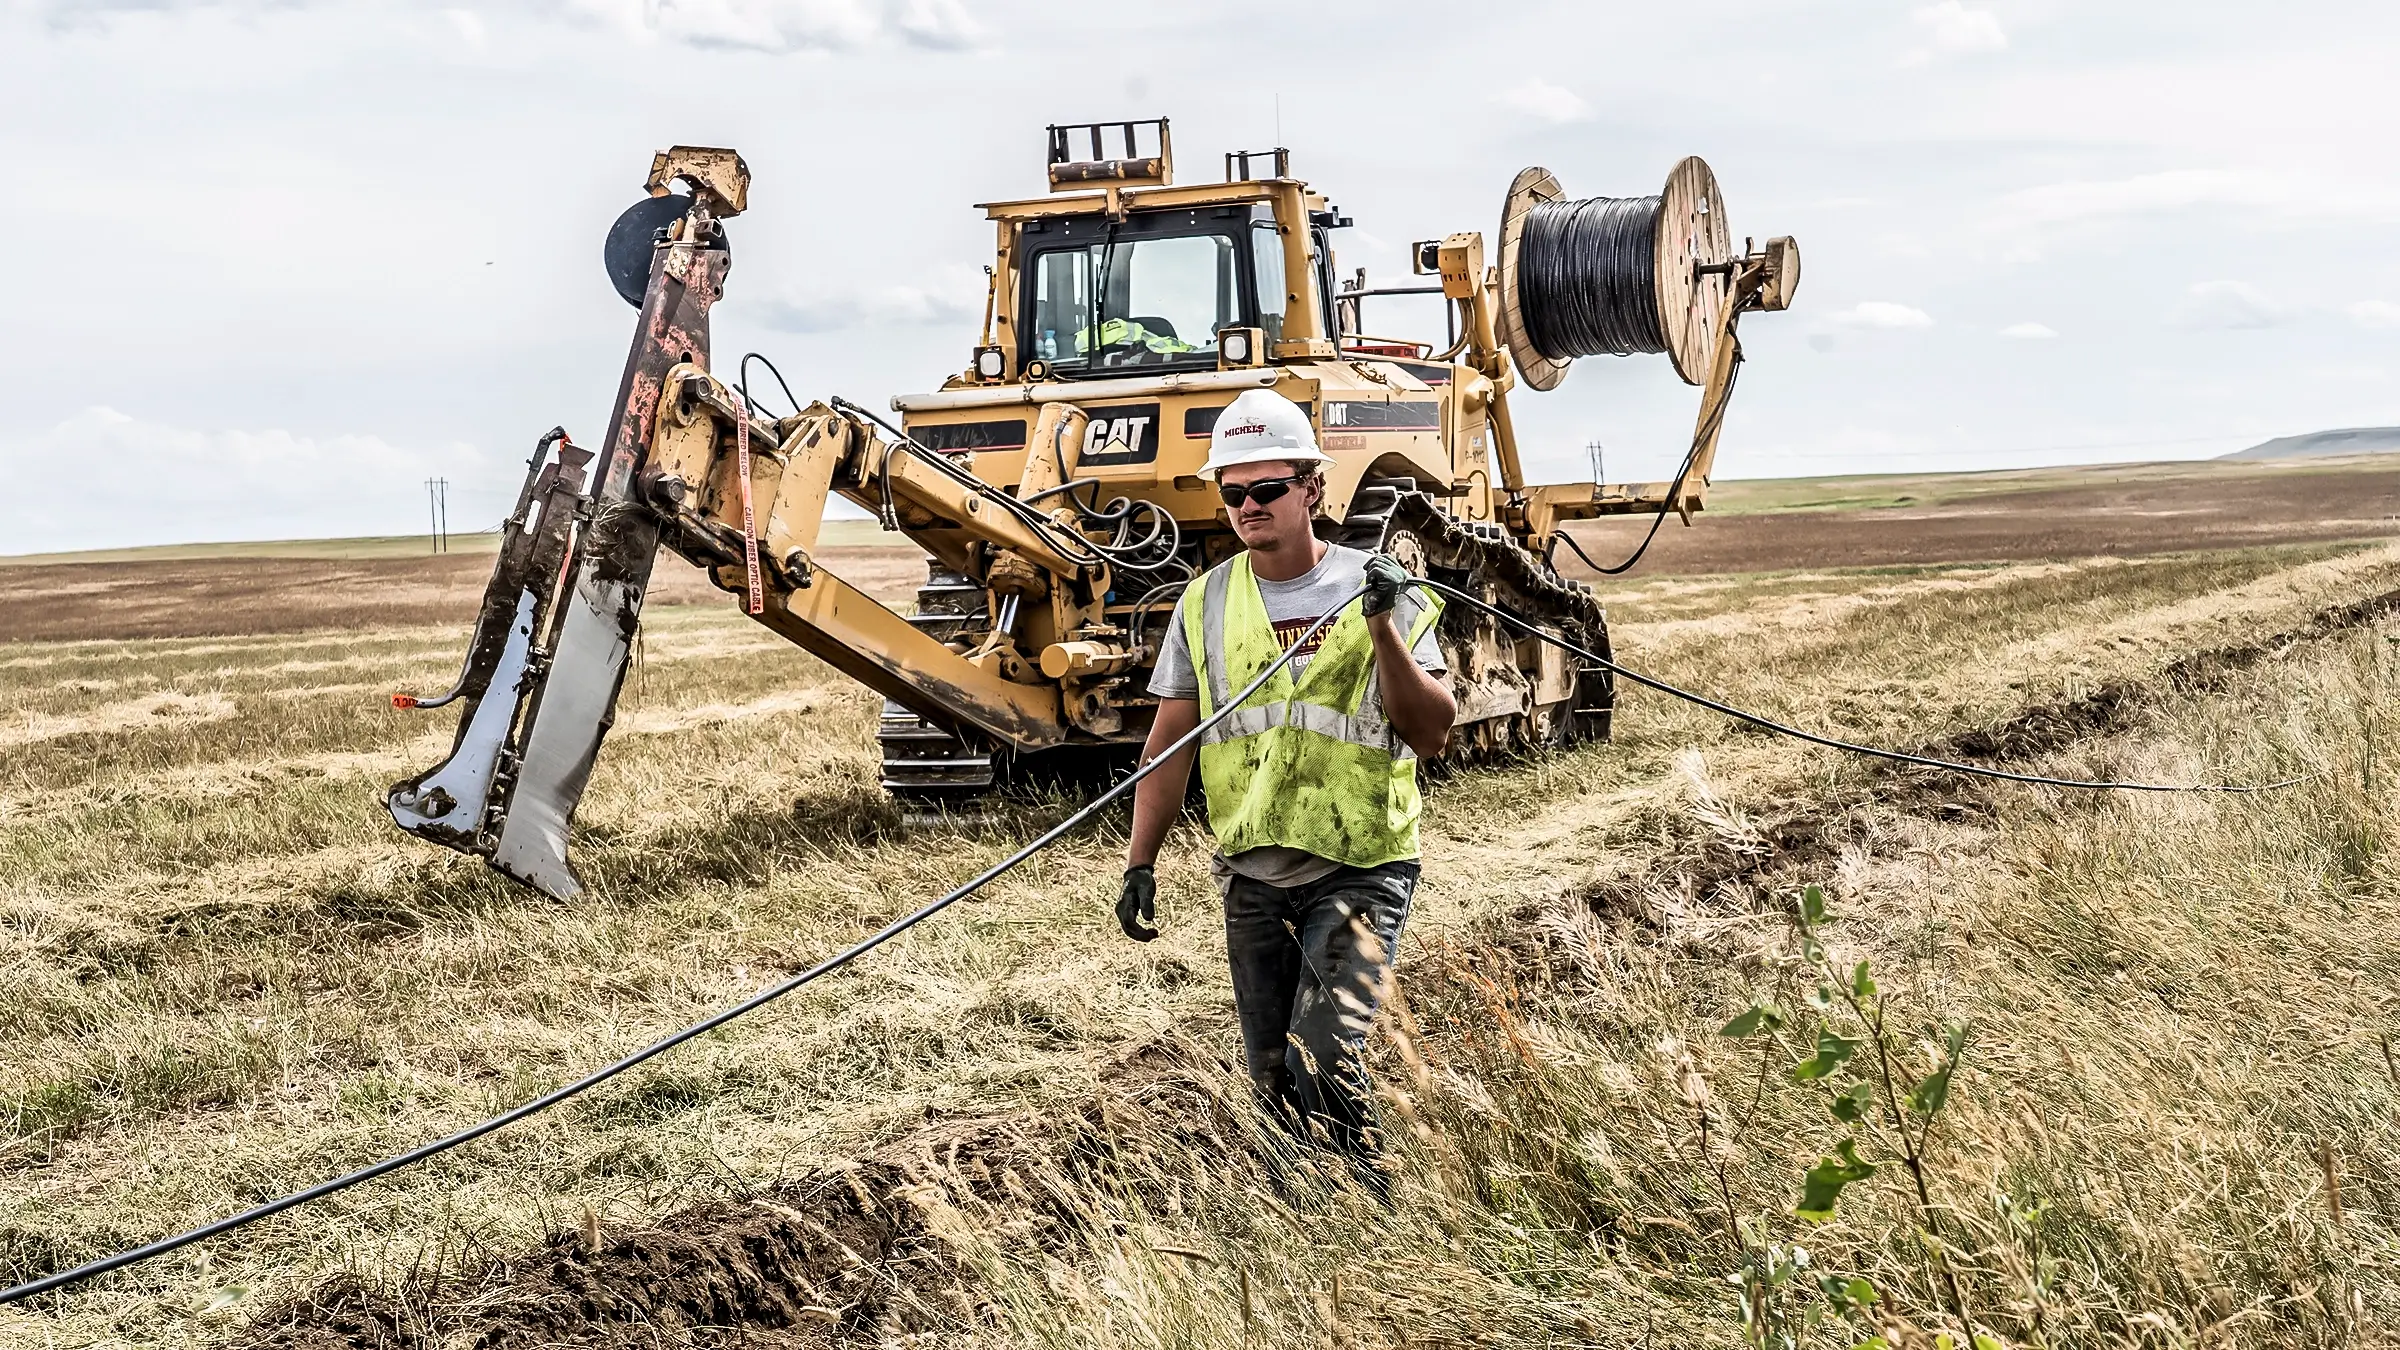 A crew member carries a coil of cable through a field near the plowing machine.